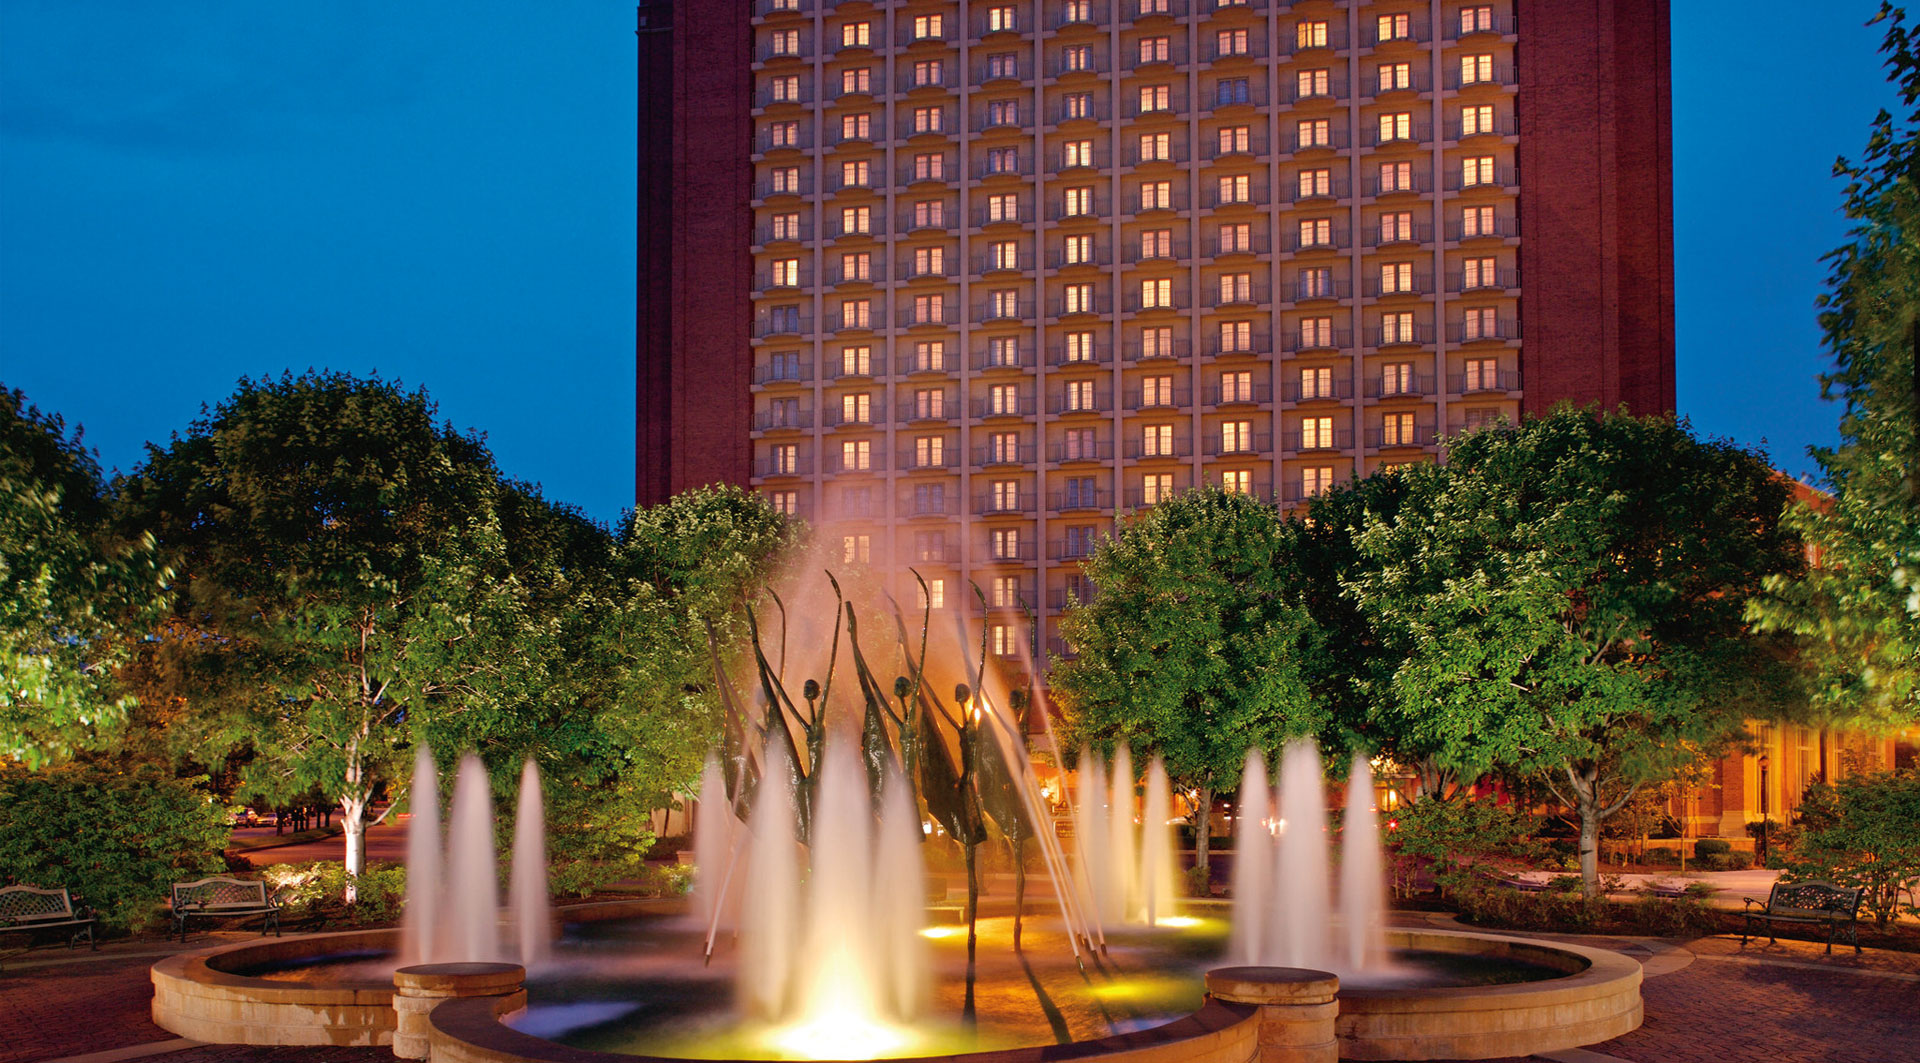 2020 NHL All Star Hotels in St. Louis, MO. Luxury Hotels.